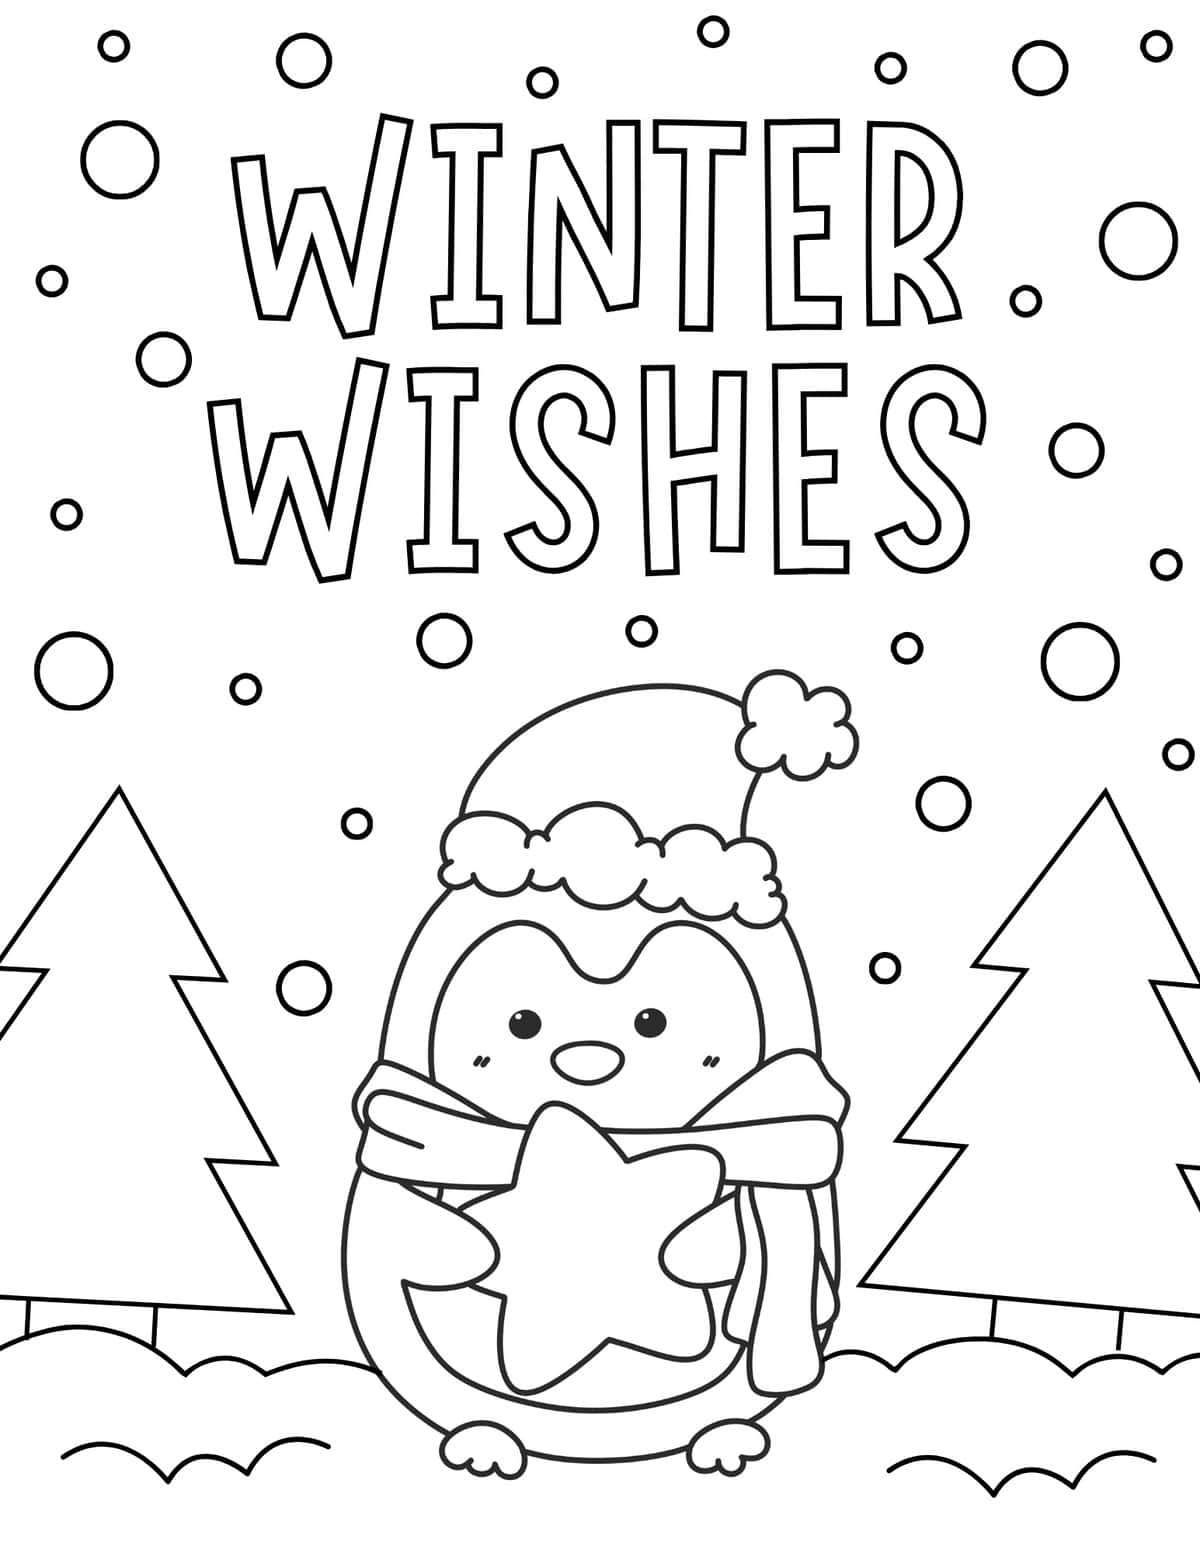 Winter wishes coloring pages